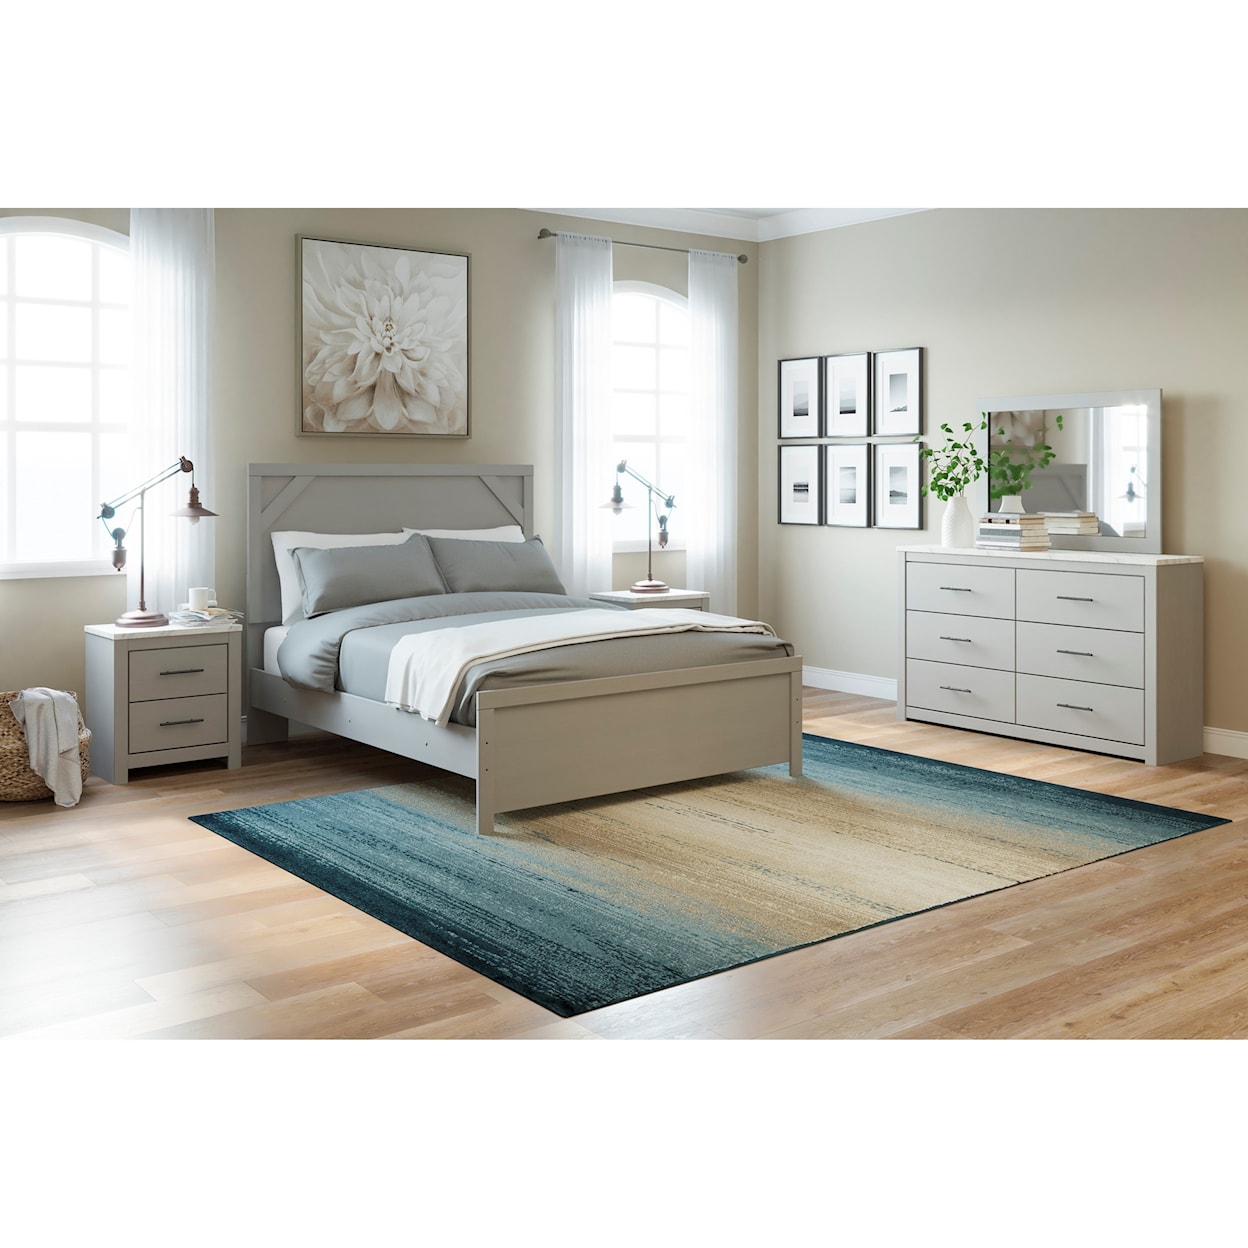 Signature Design by Ashley Furniture Cottonburg Queen Bedroom Group